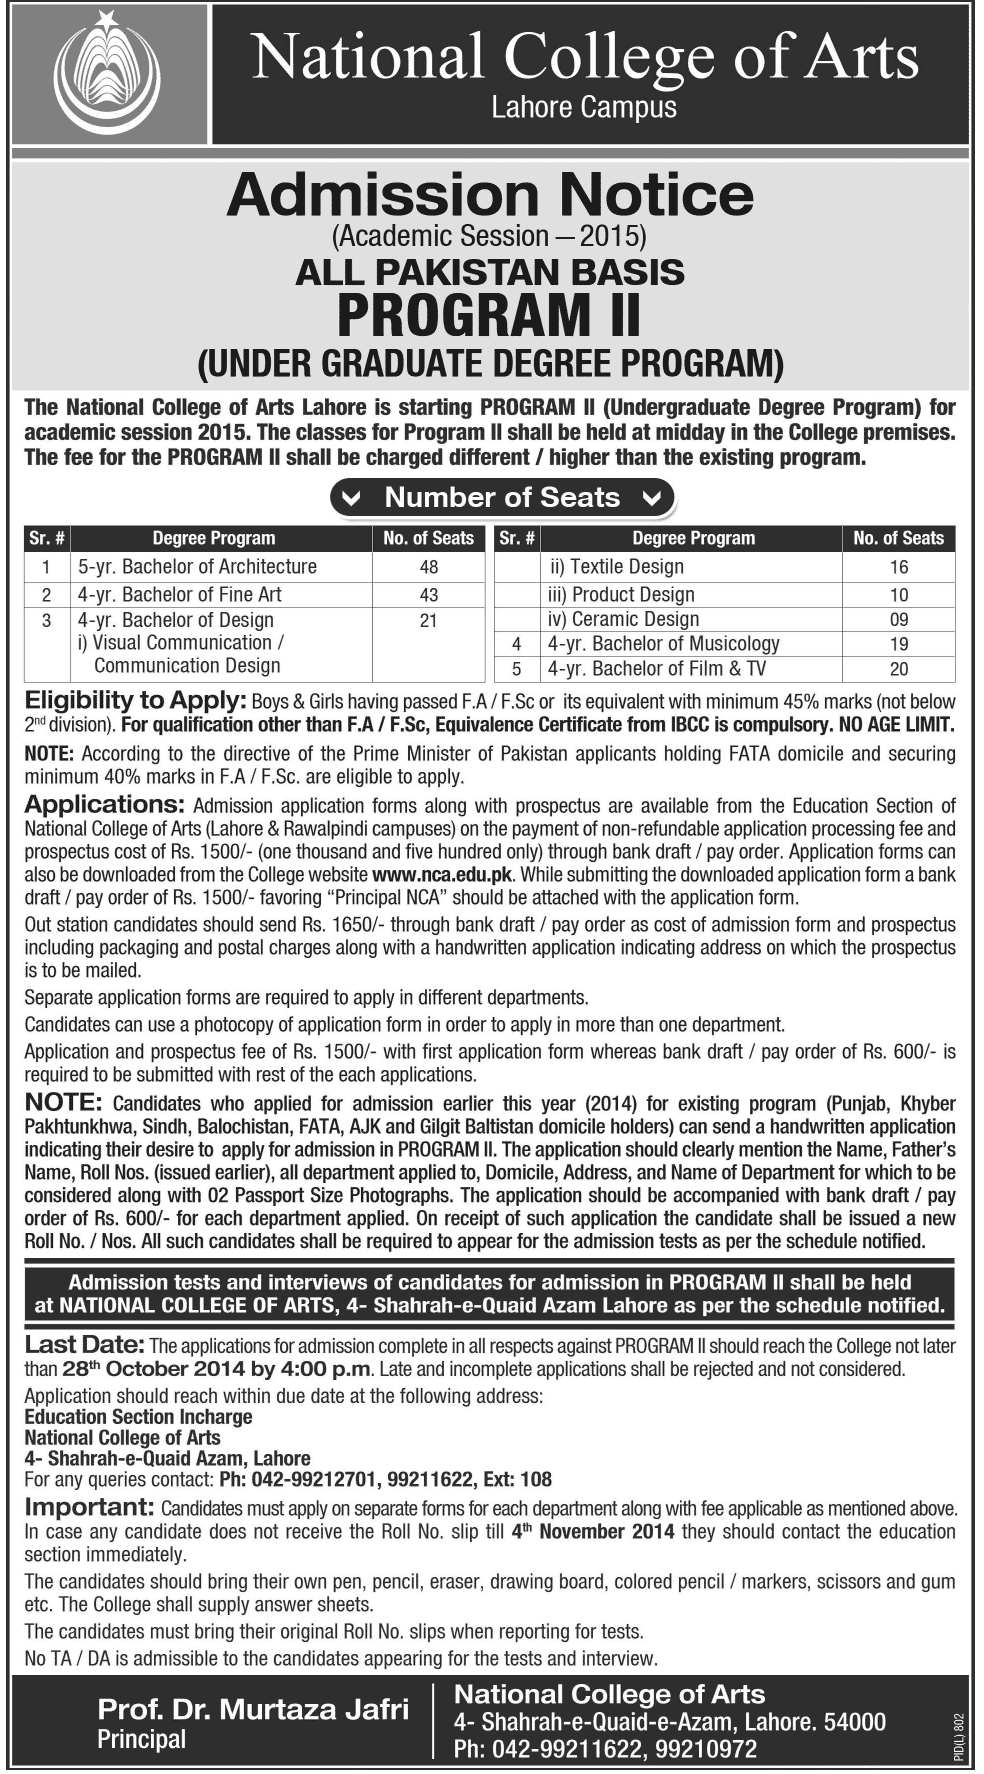 National College of Arts Lahore Admission Notice 2014